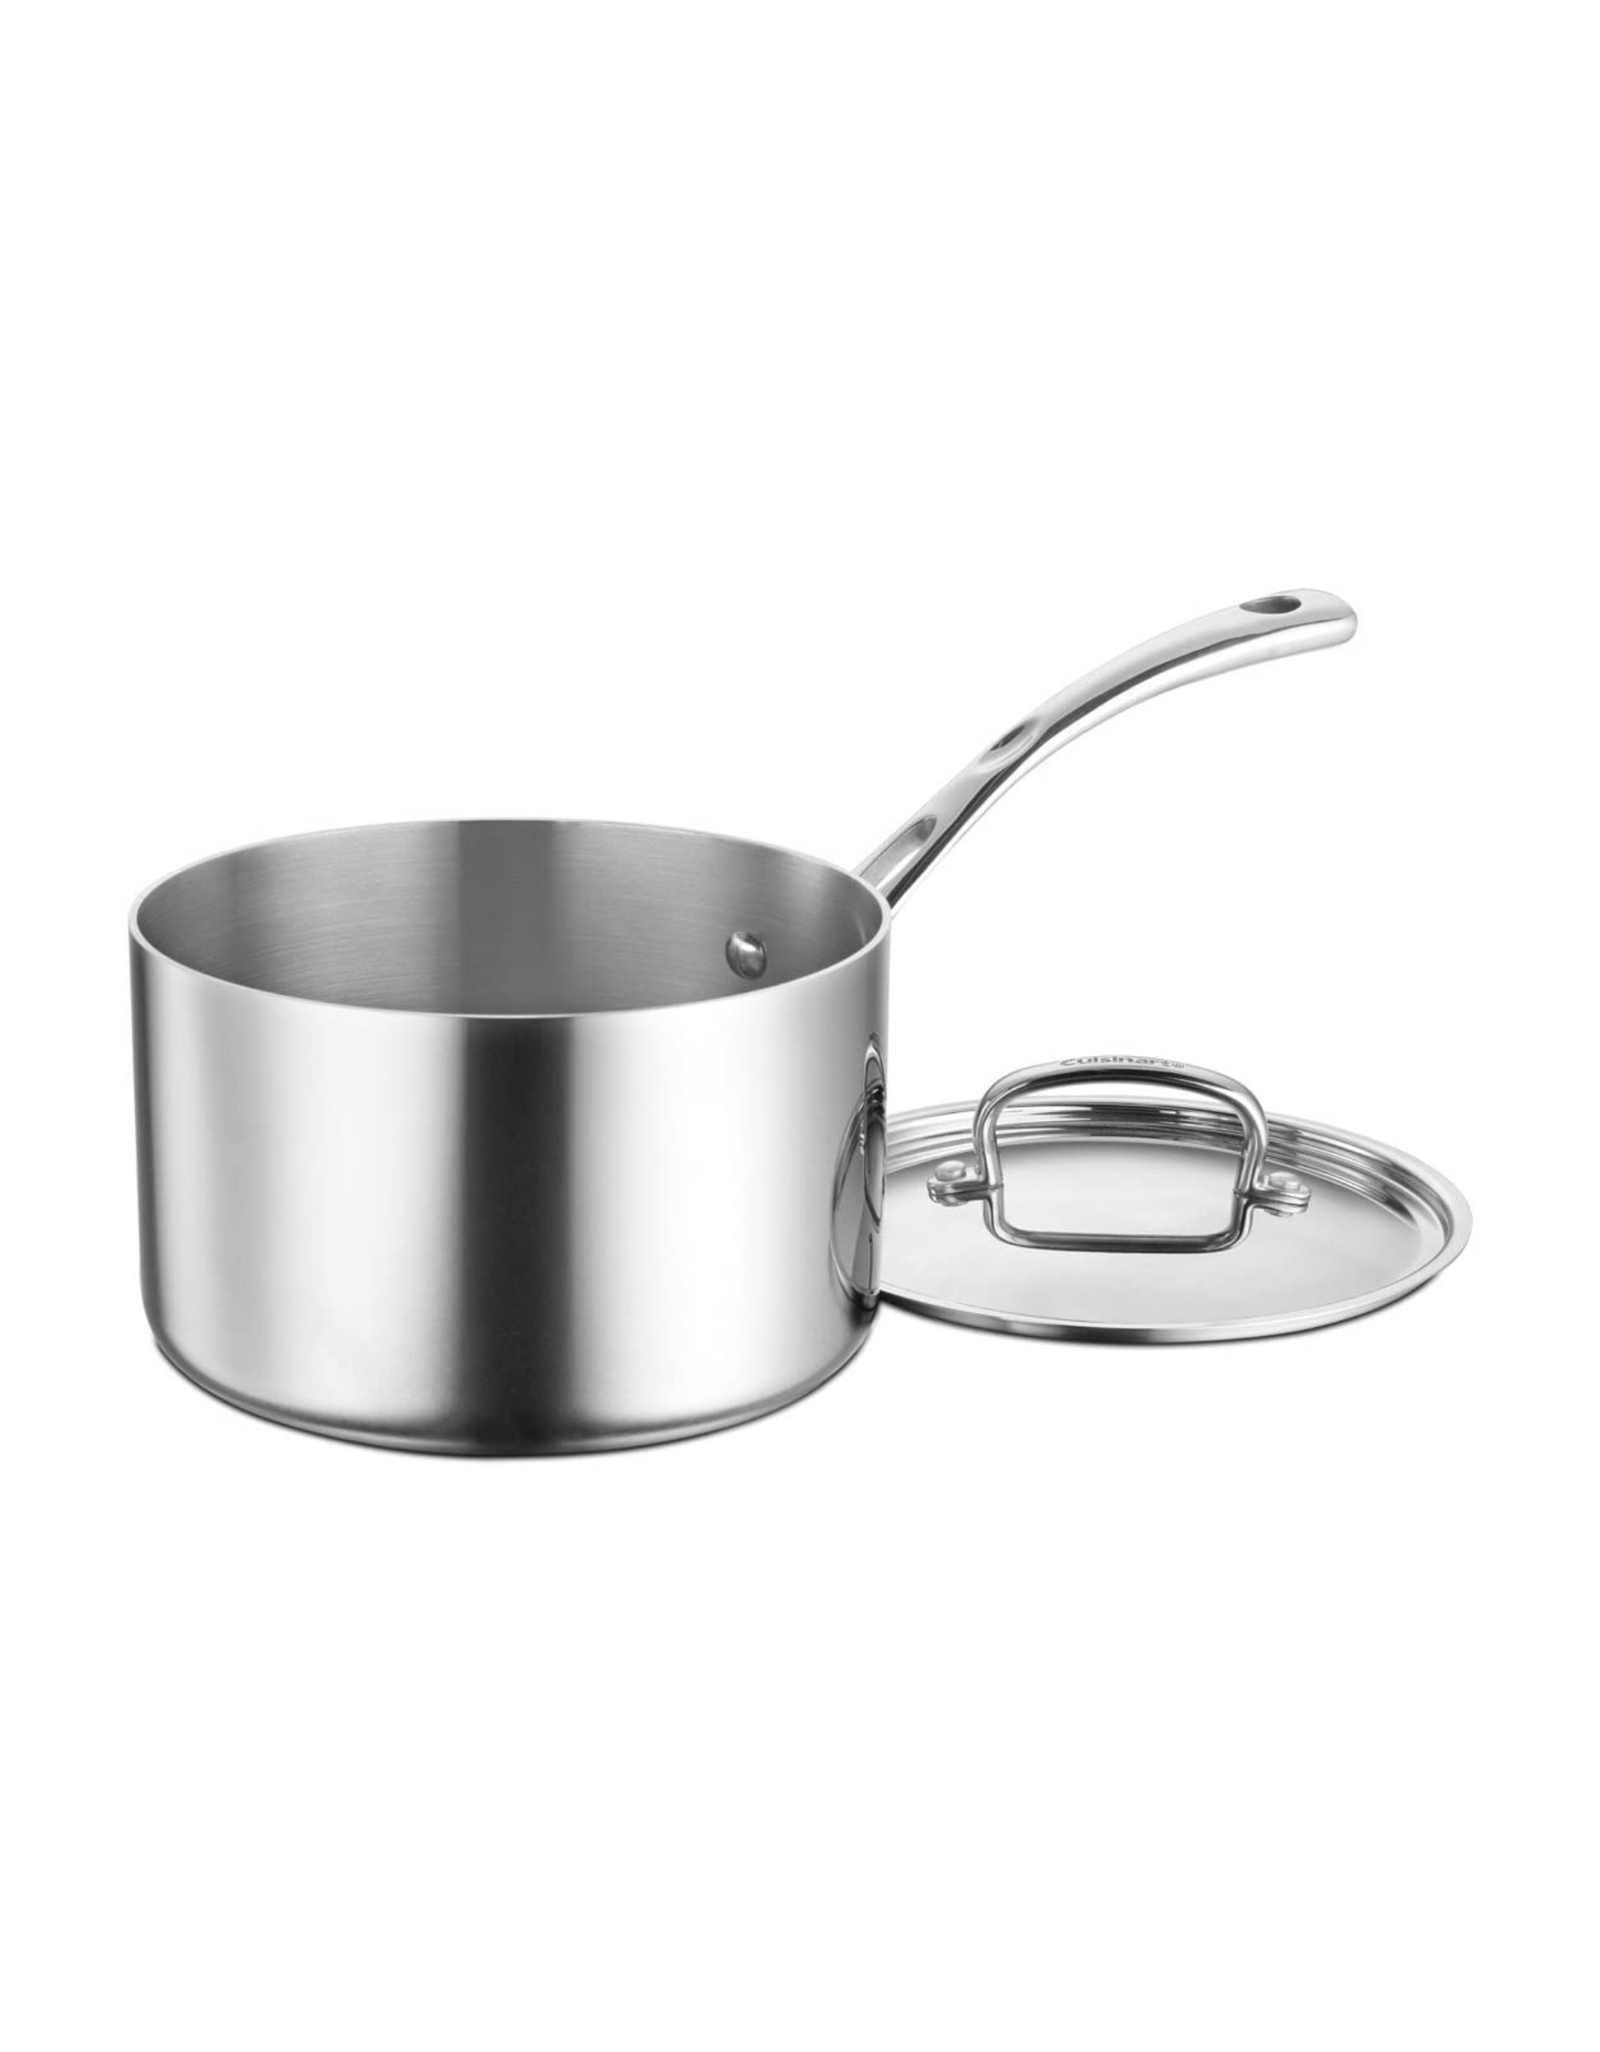 Cuisinart FCT193-18 French Classic Tri-Ply Stainless Saucepot with Cover, 3 Qt